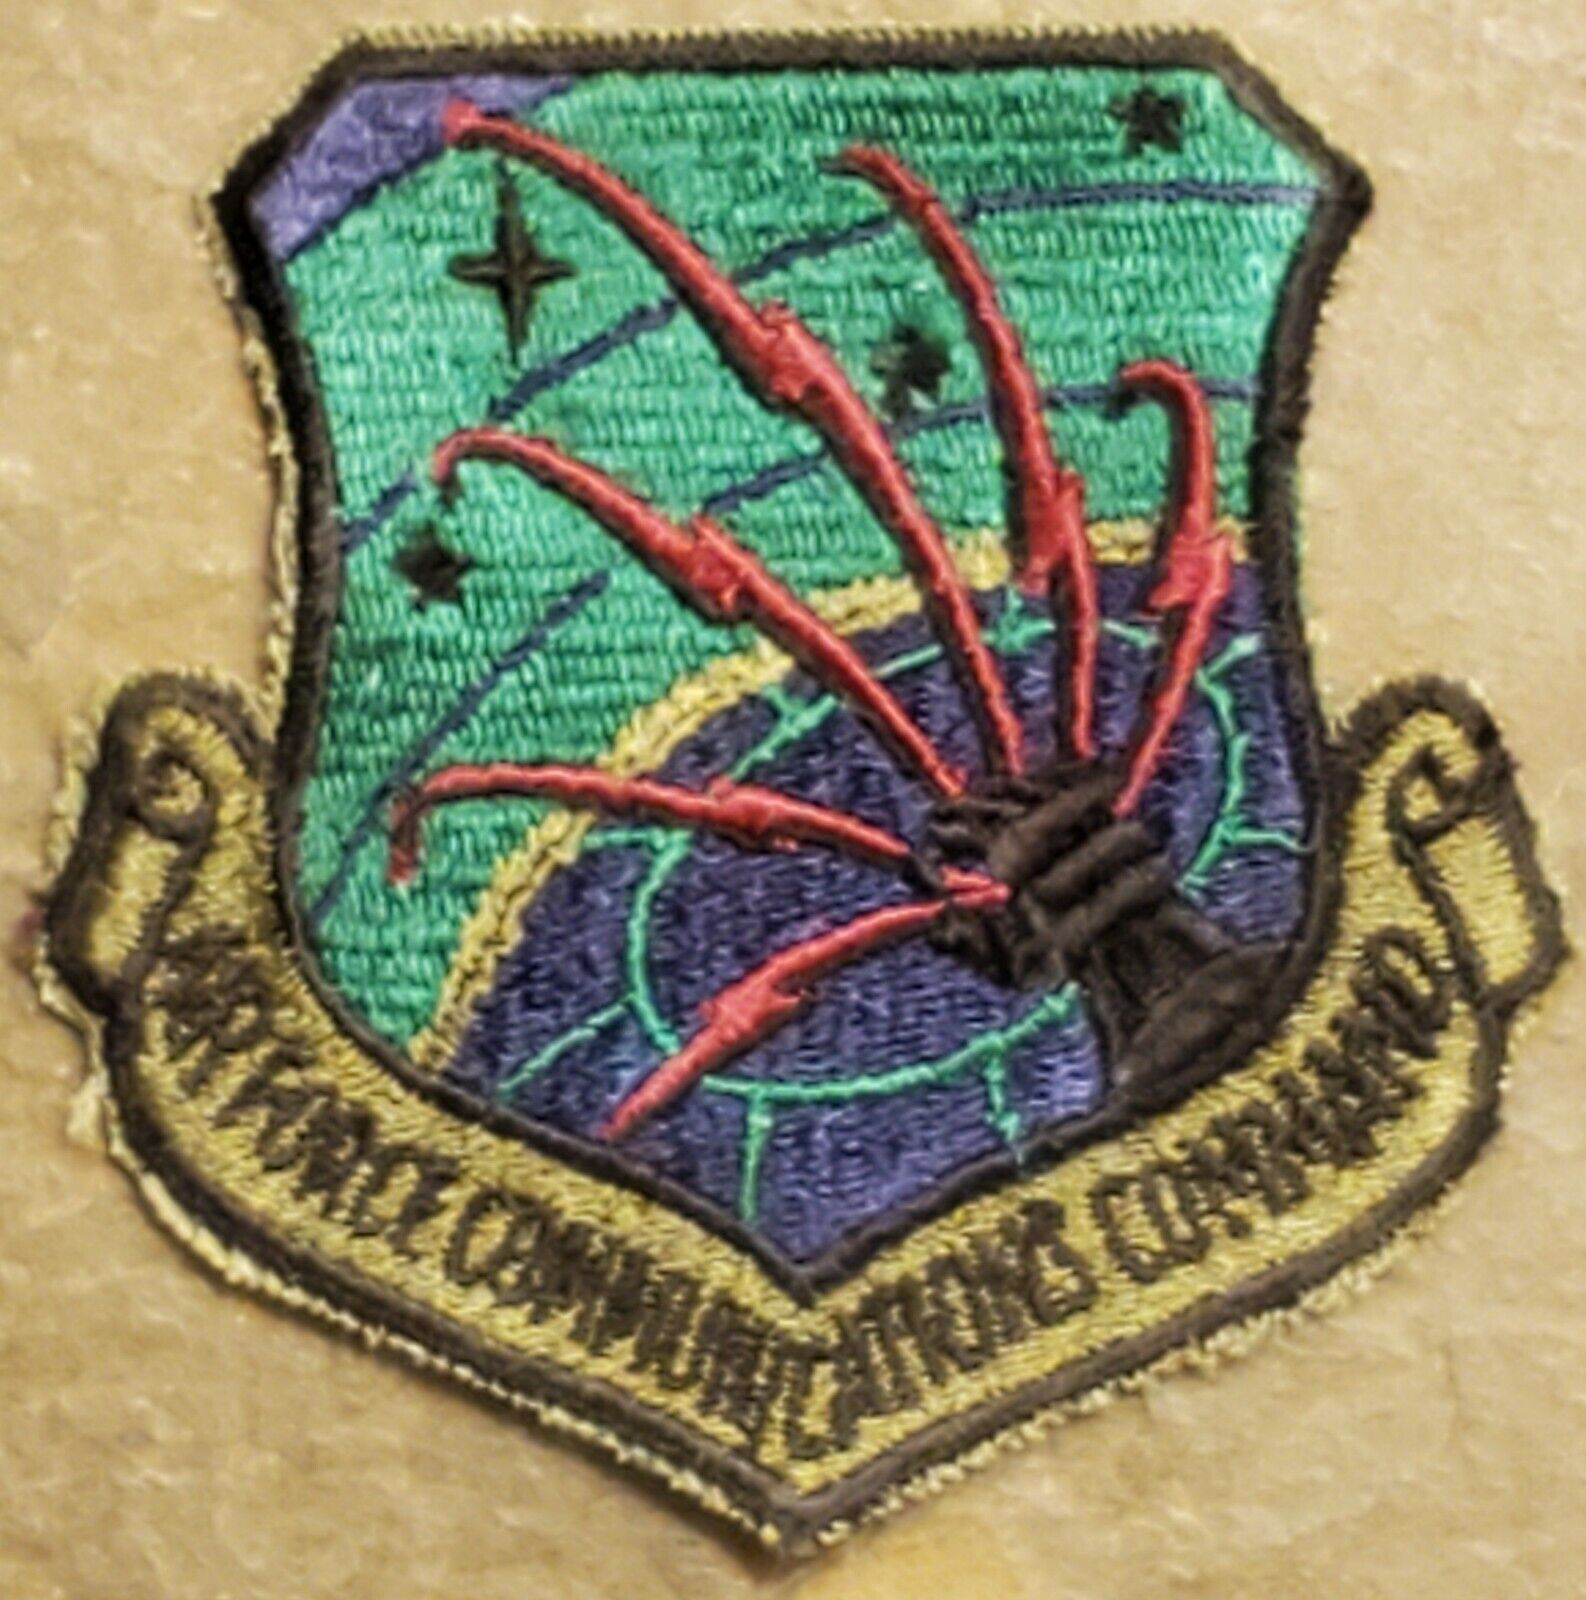 USAF COMMUNICATIONS COMMAND PATCH - SUBDUED: SCOTT AFB, IL: MILITARY VINTAGE